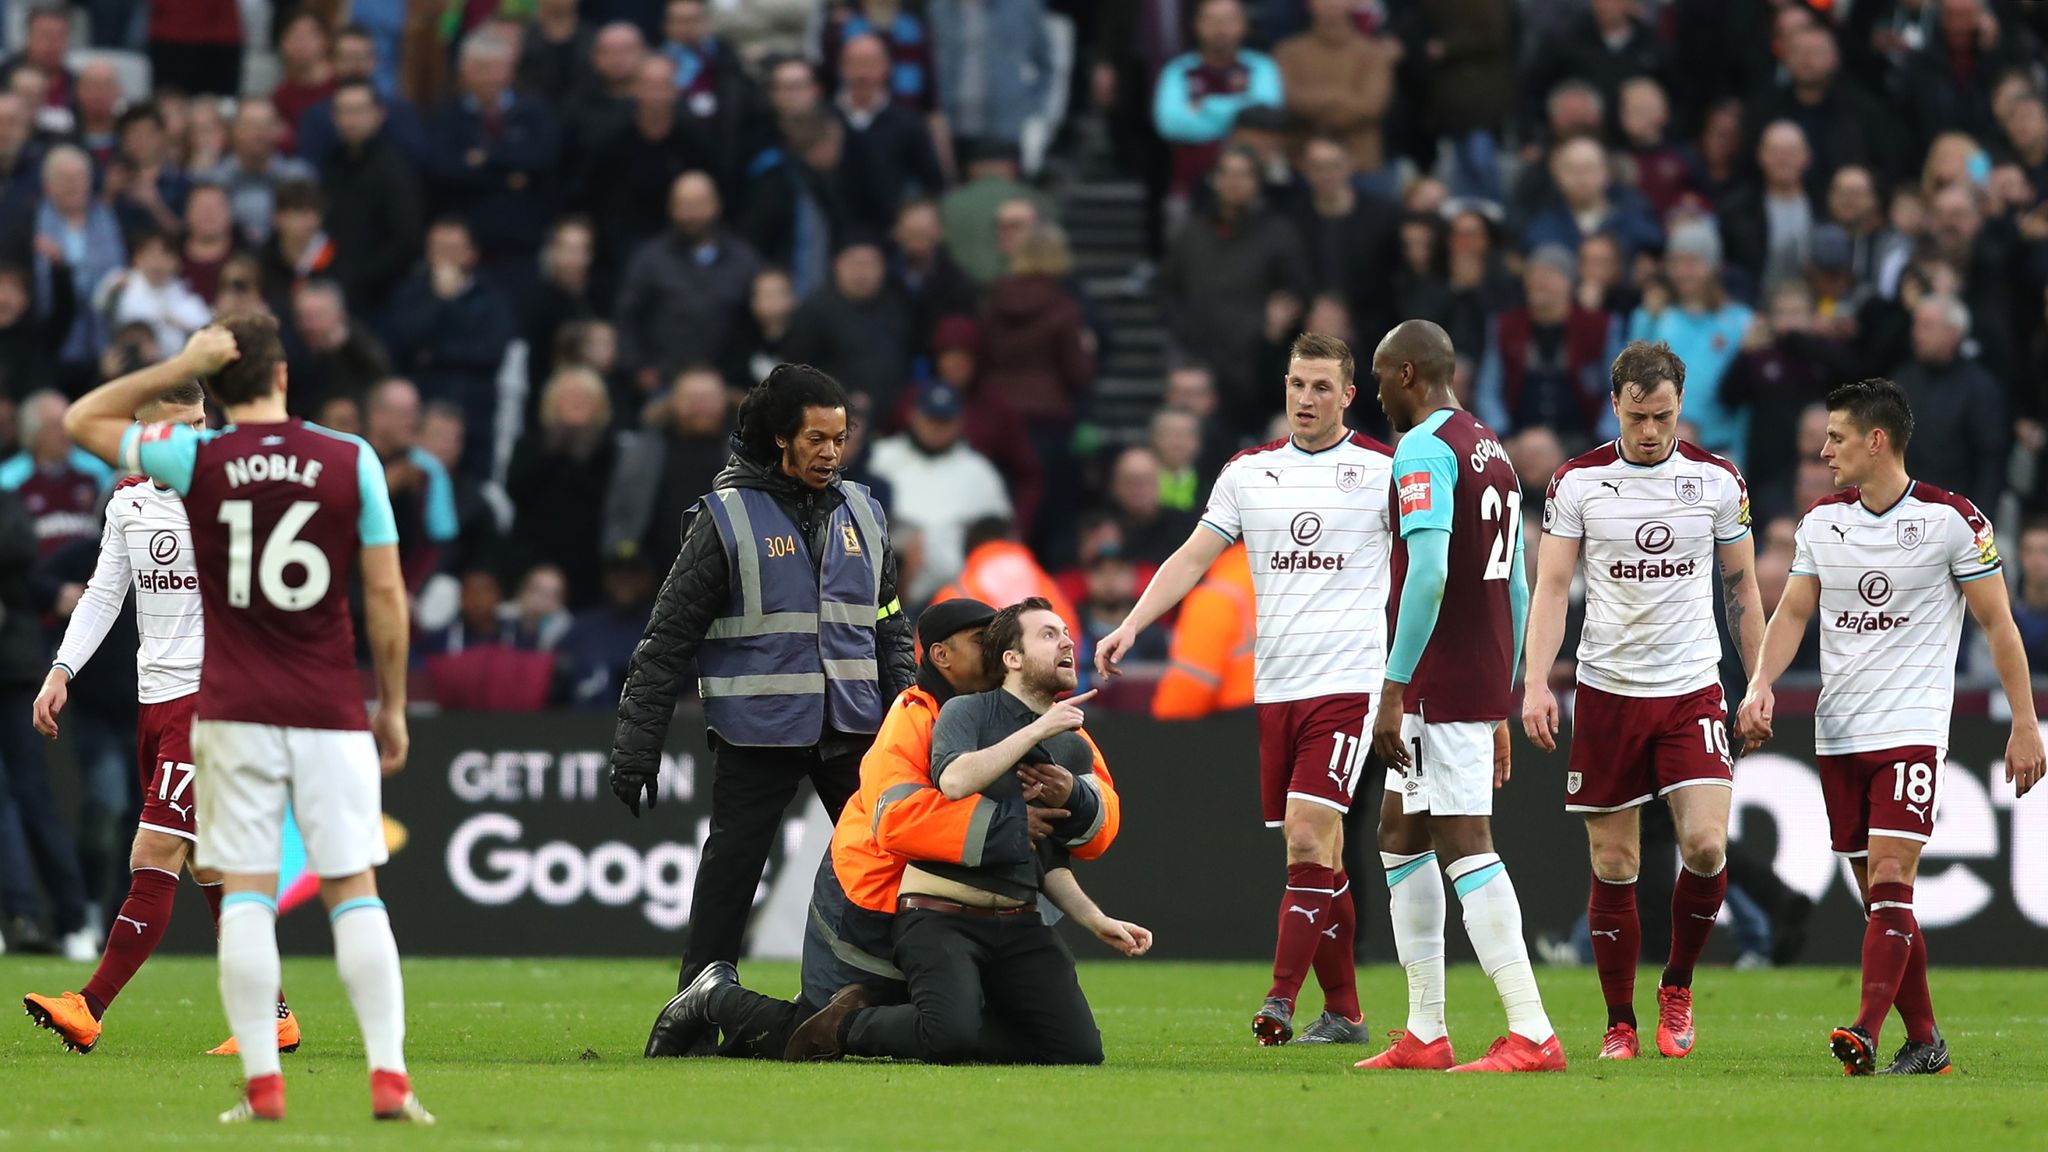 Ugly scenes as pitch invasions halt West Ham defeat to Burnley | UK ...